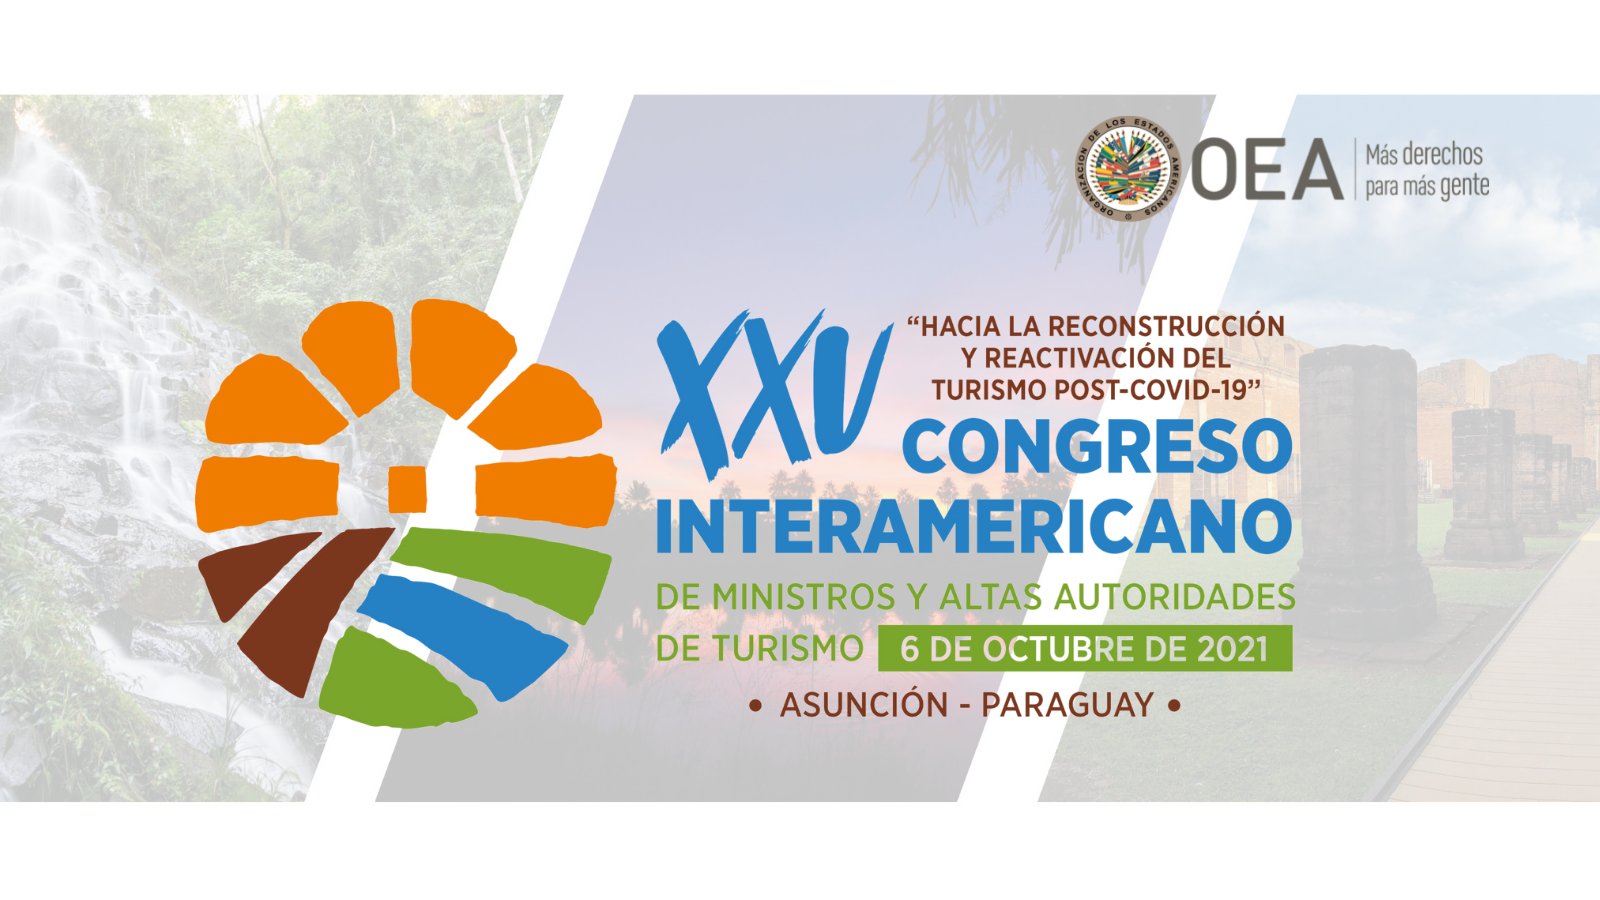 ISTO Americas participates in the XXV Inter-American Congress of Ministers and High-Level Authorities of Tourism